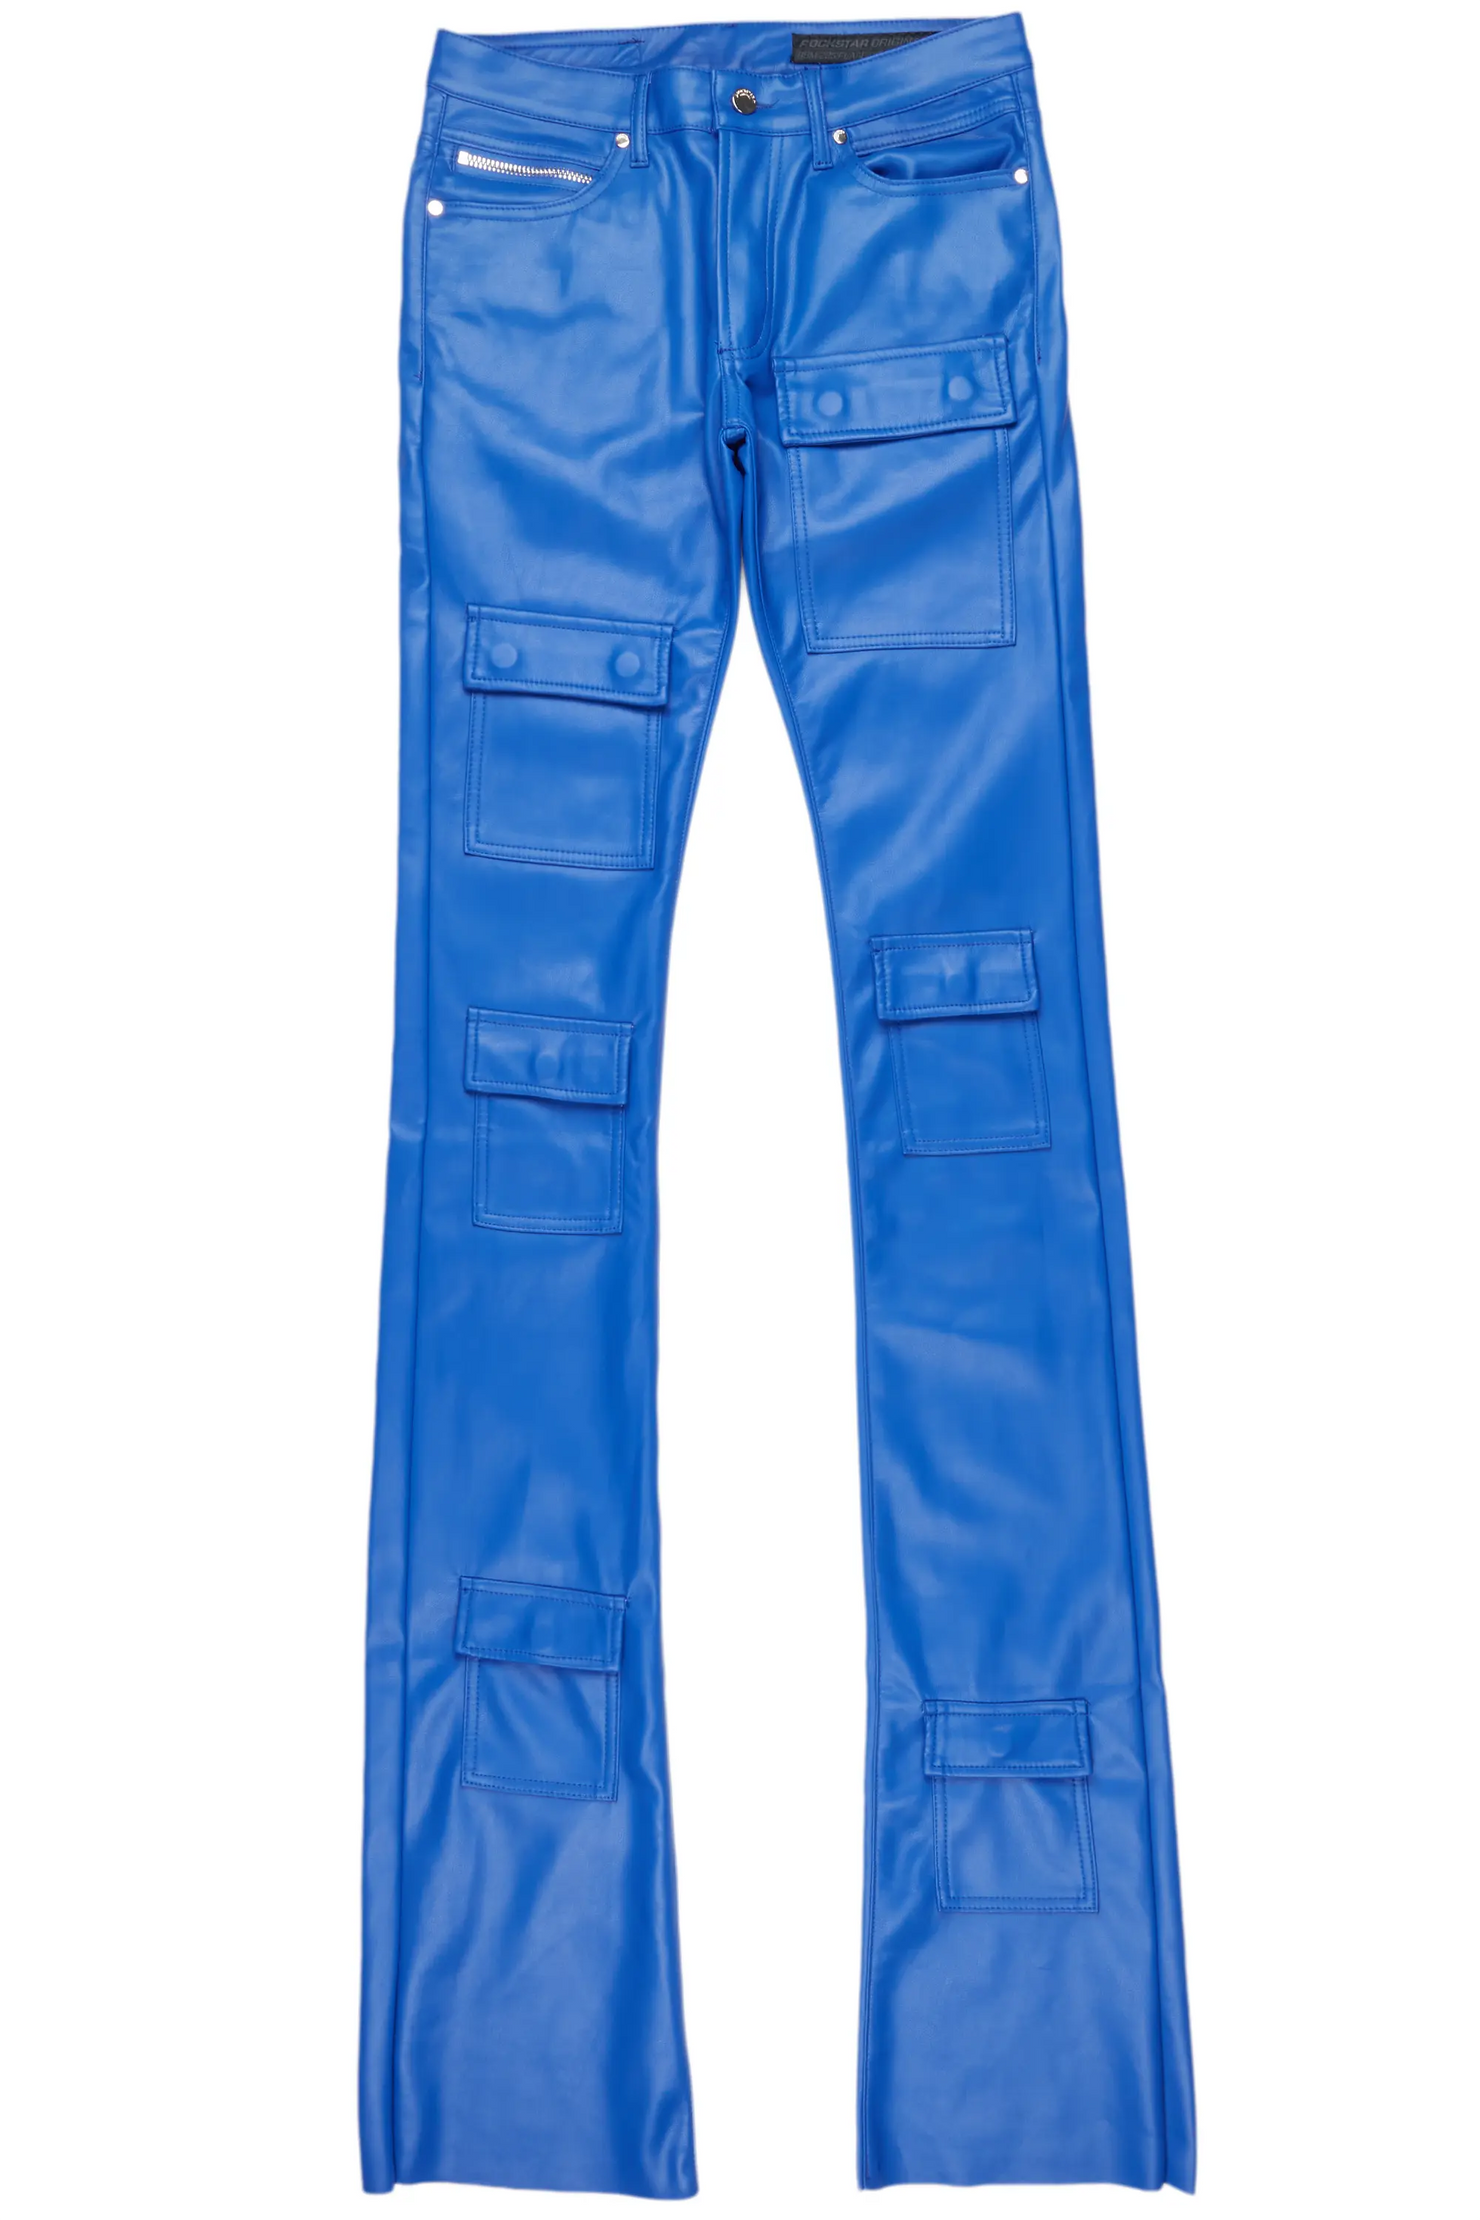 Petrus Royal Faux Leather Super Stacked Flare Jean